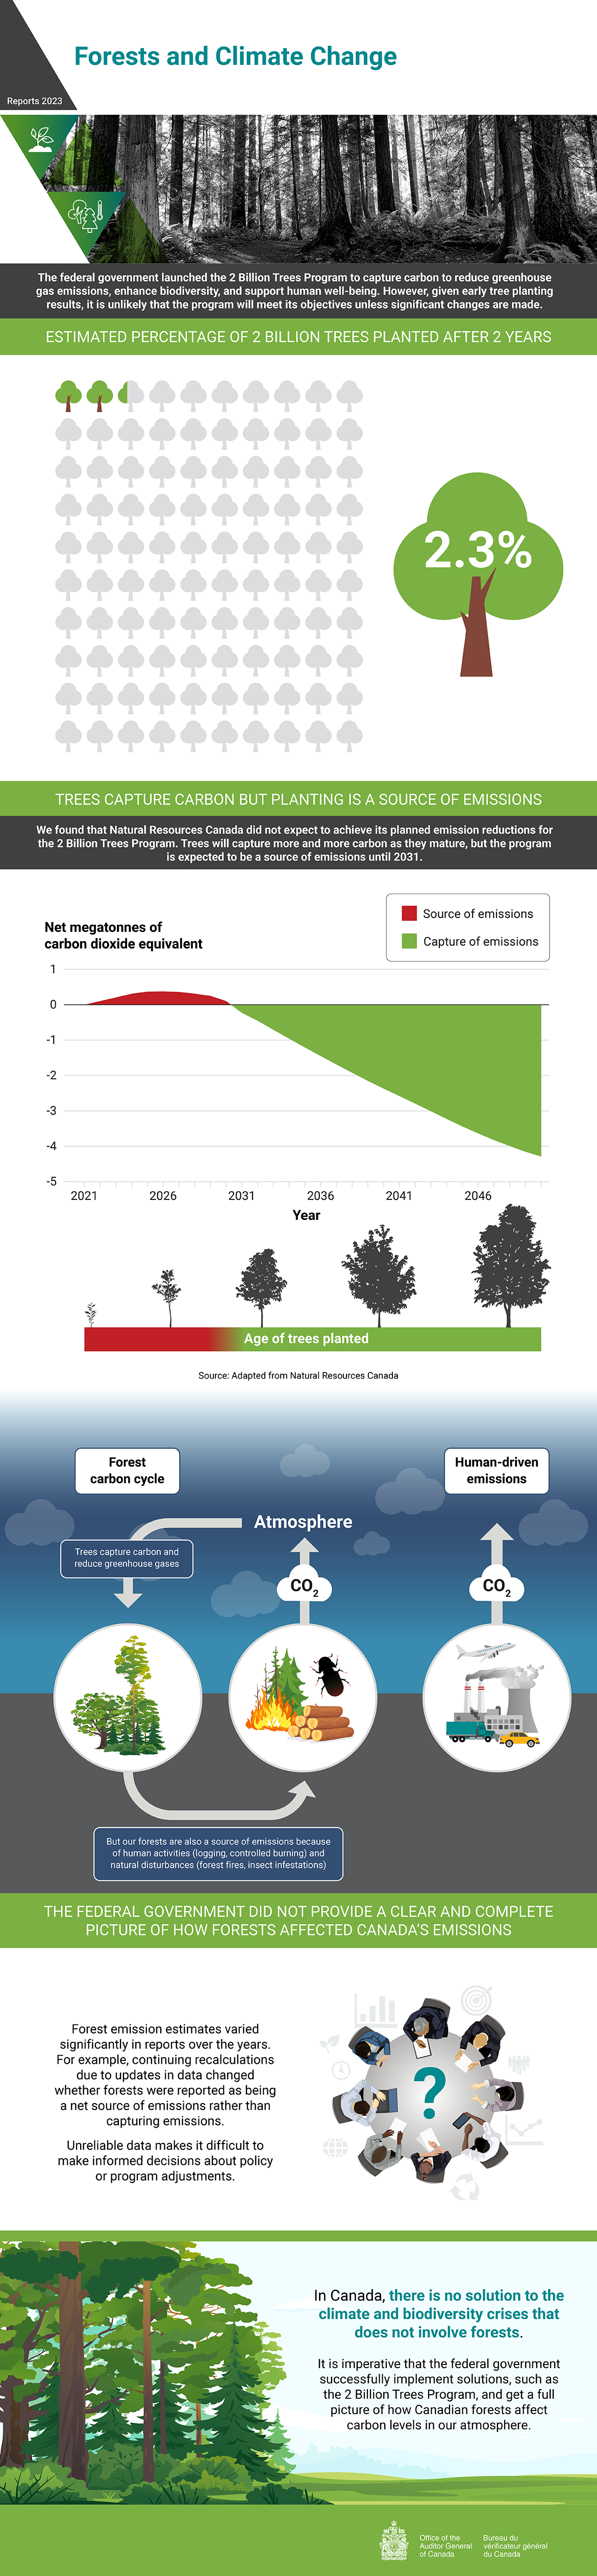 Infographic about Report 1 Forests and Climate Change